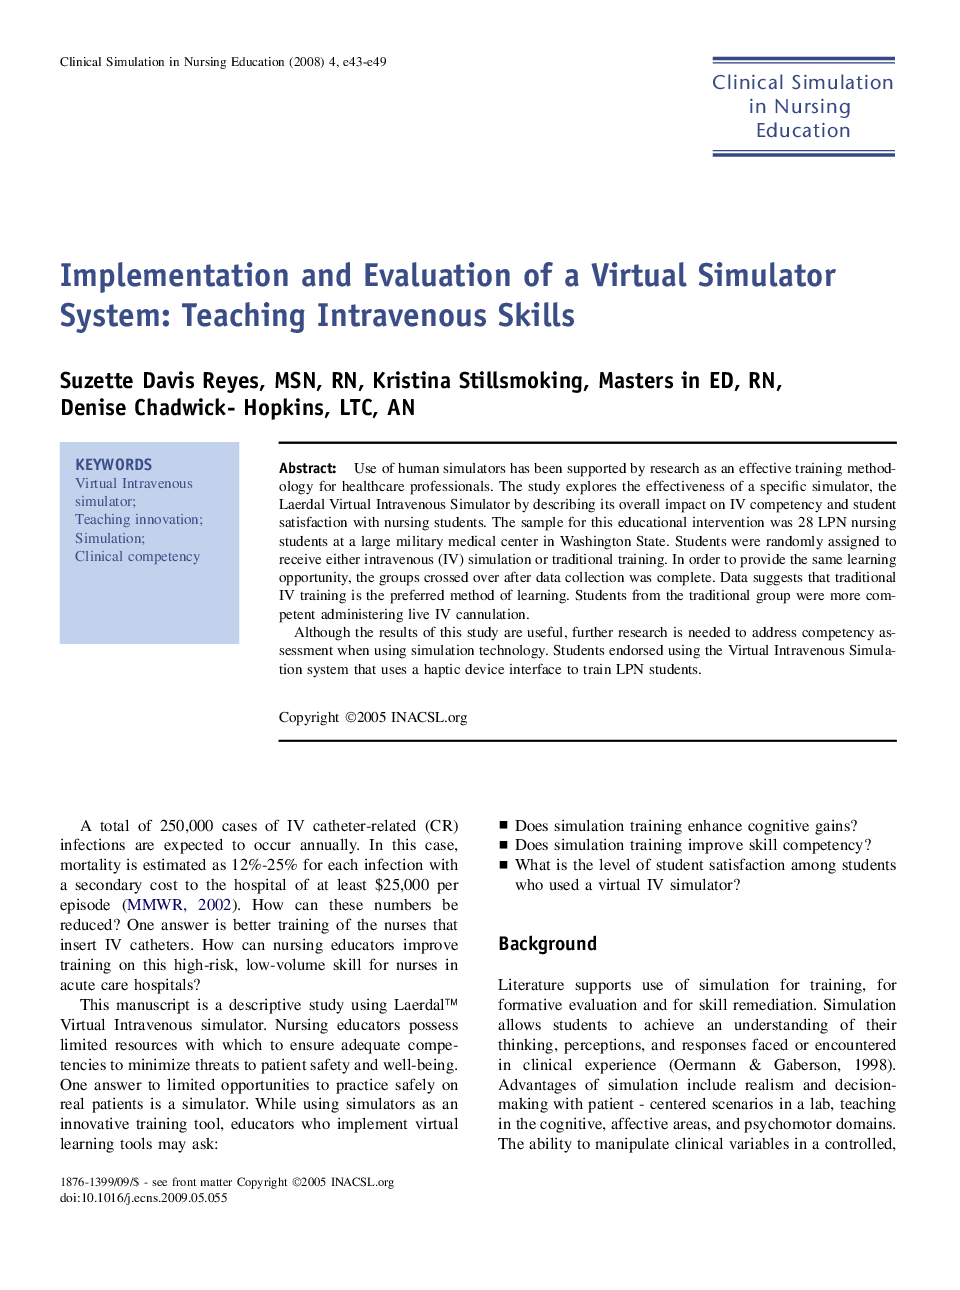 Implementation and Evaluation of a Virtual Simulator System: Teaching Intravenous Skills